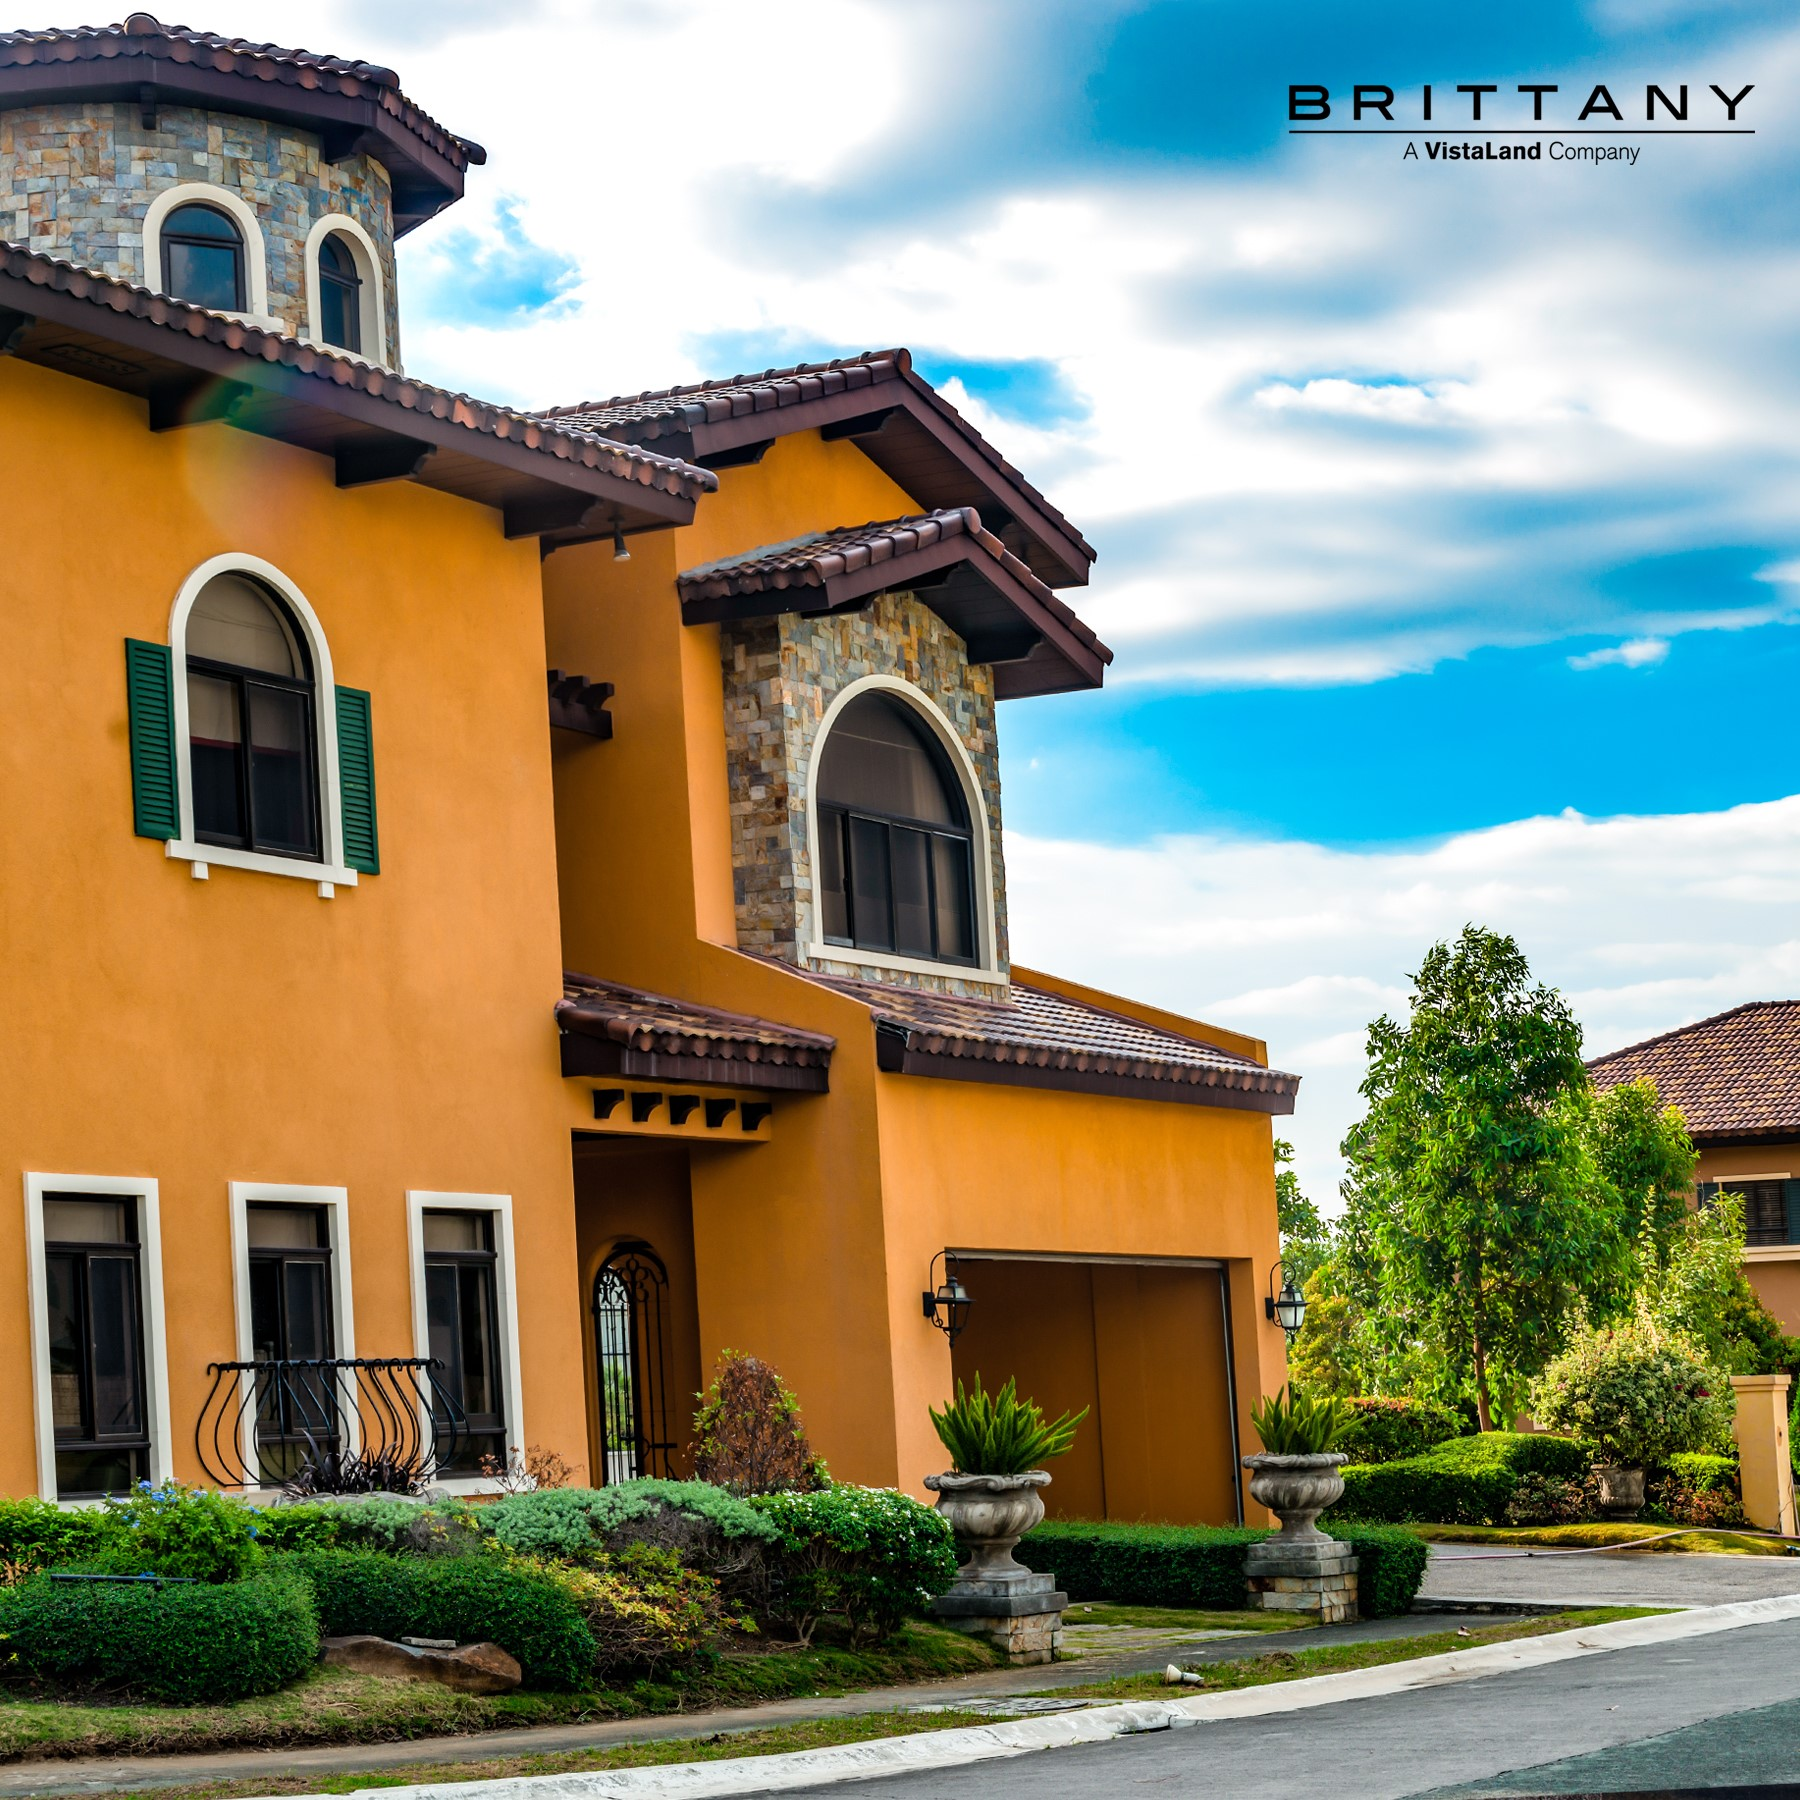 Brittany Corporation specializes in giving you classical and modern luxury homes from their community-themed developments.